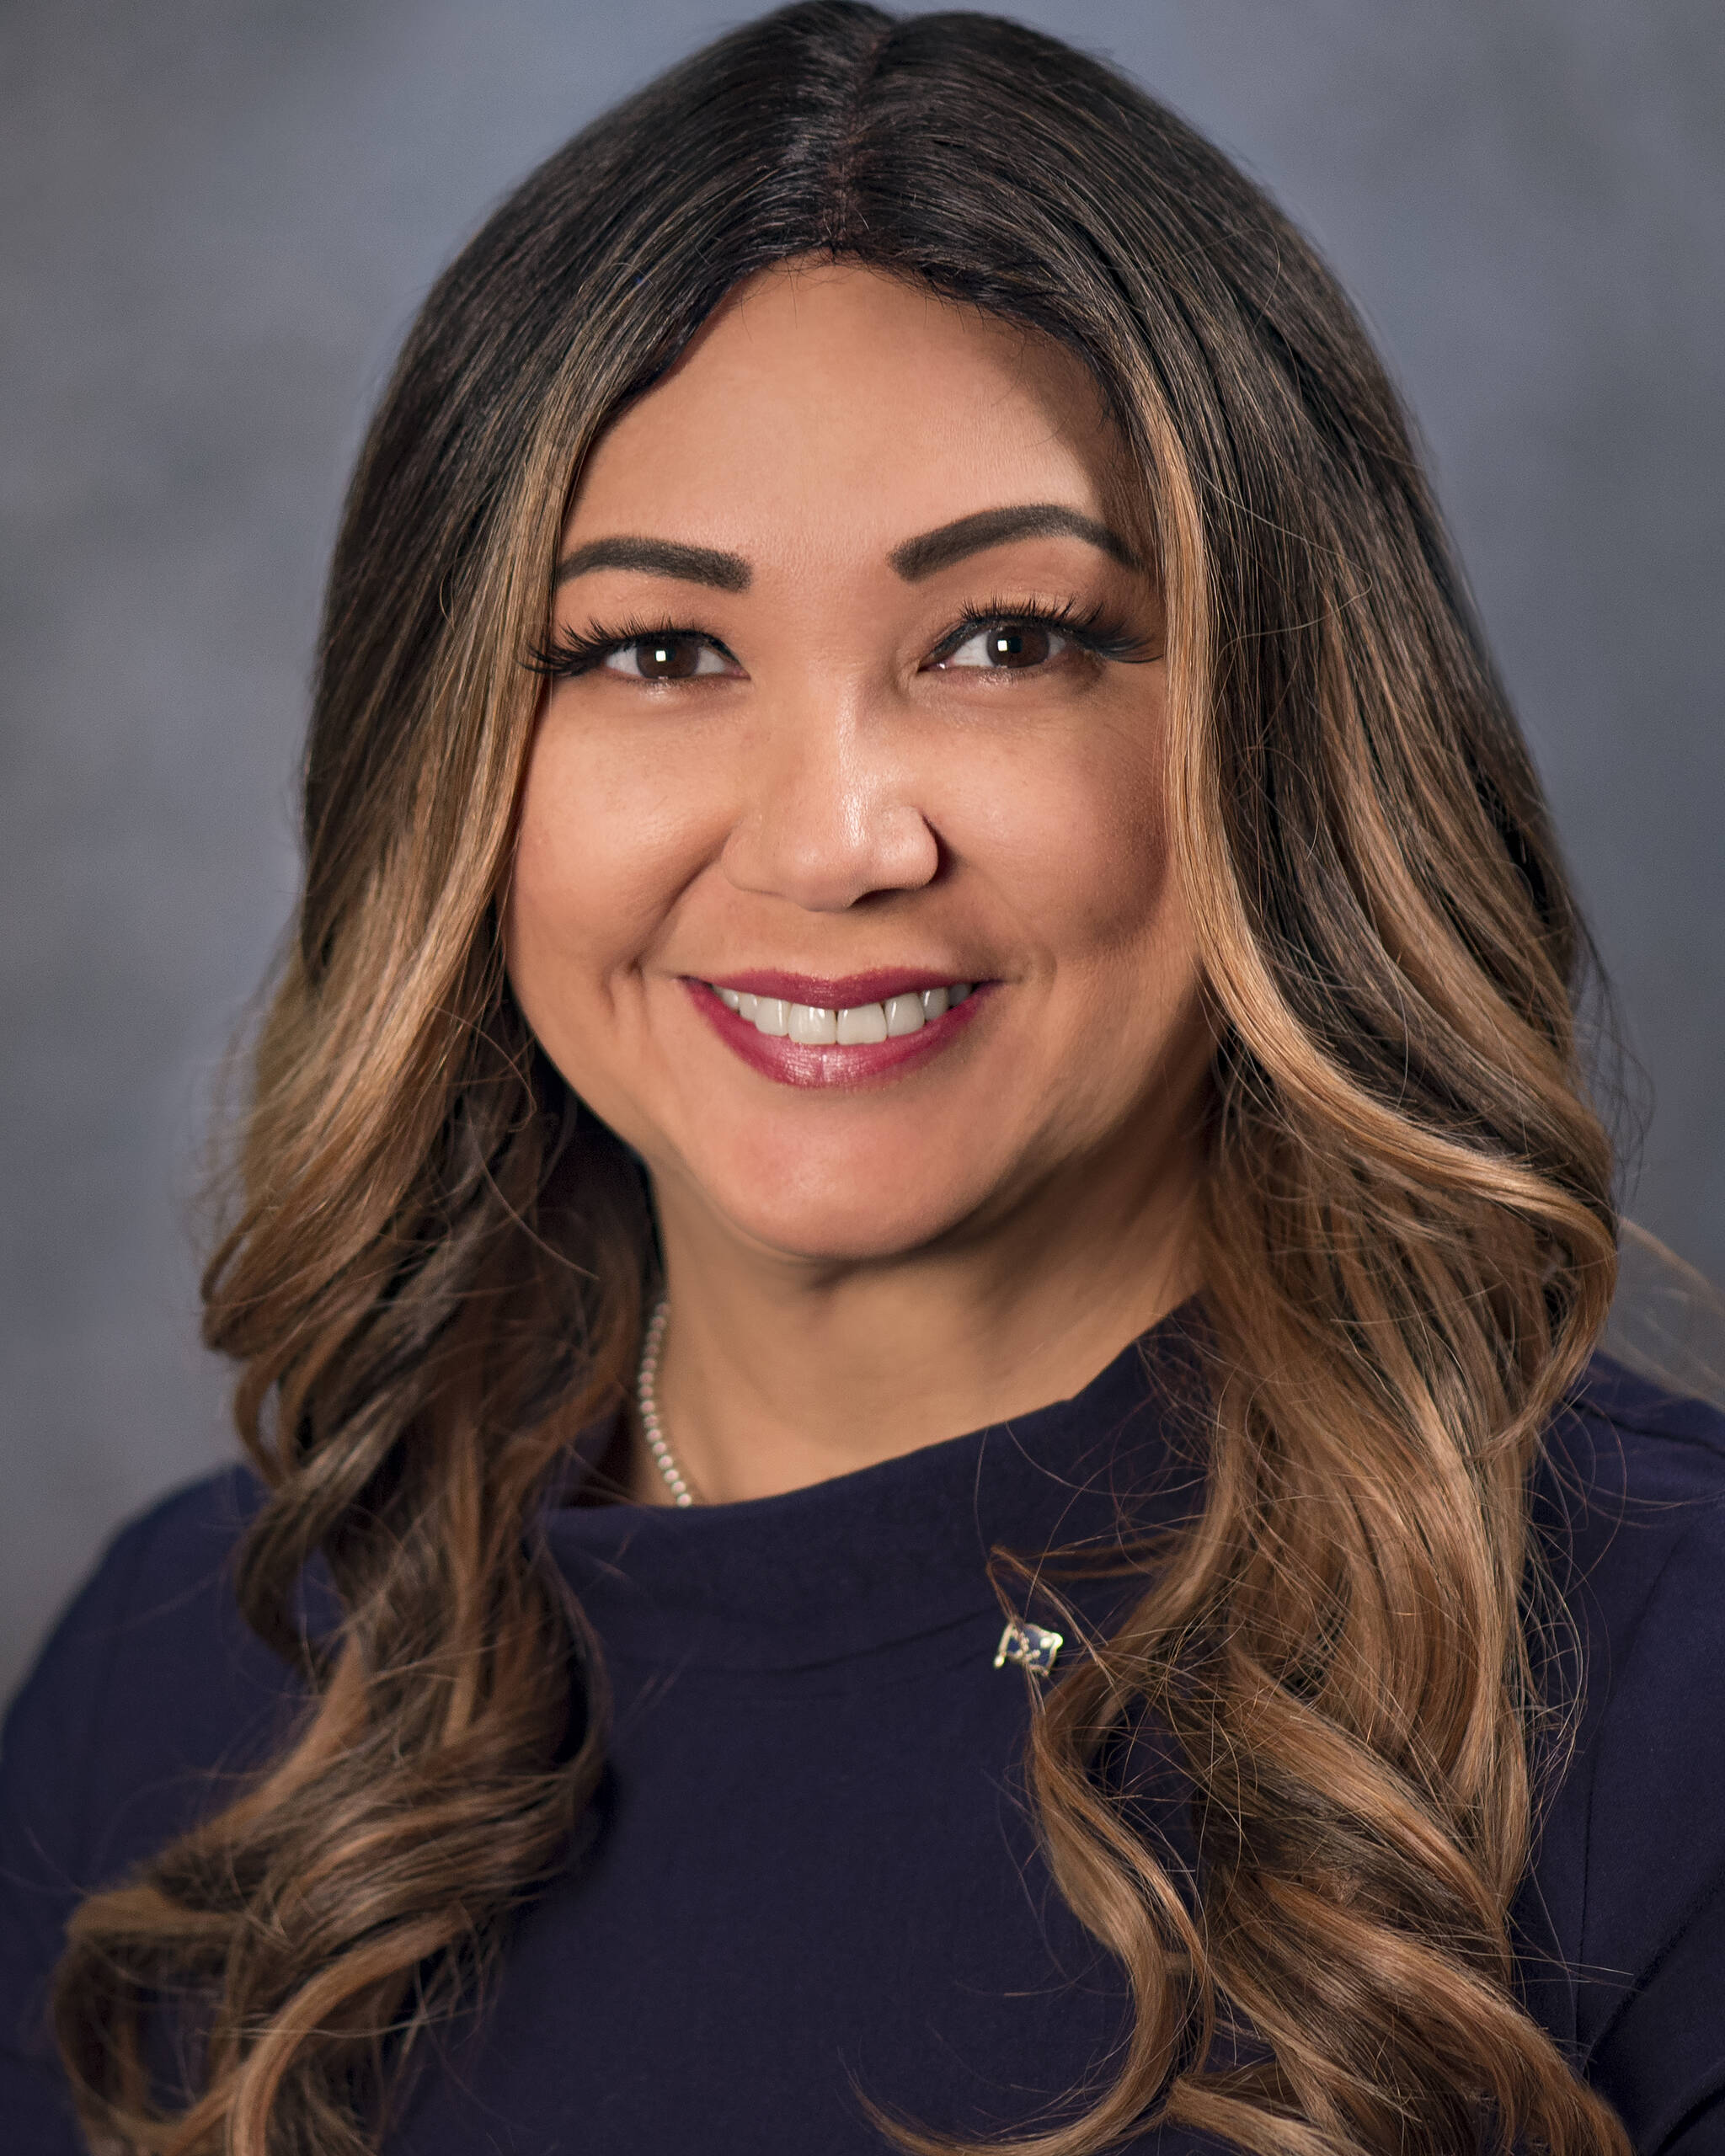 Kim Kovol will be the acting commissioner for the new Alaska Department of Family and Community Services which debuts Friday. (Courtesy Photo)